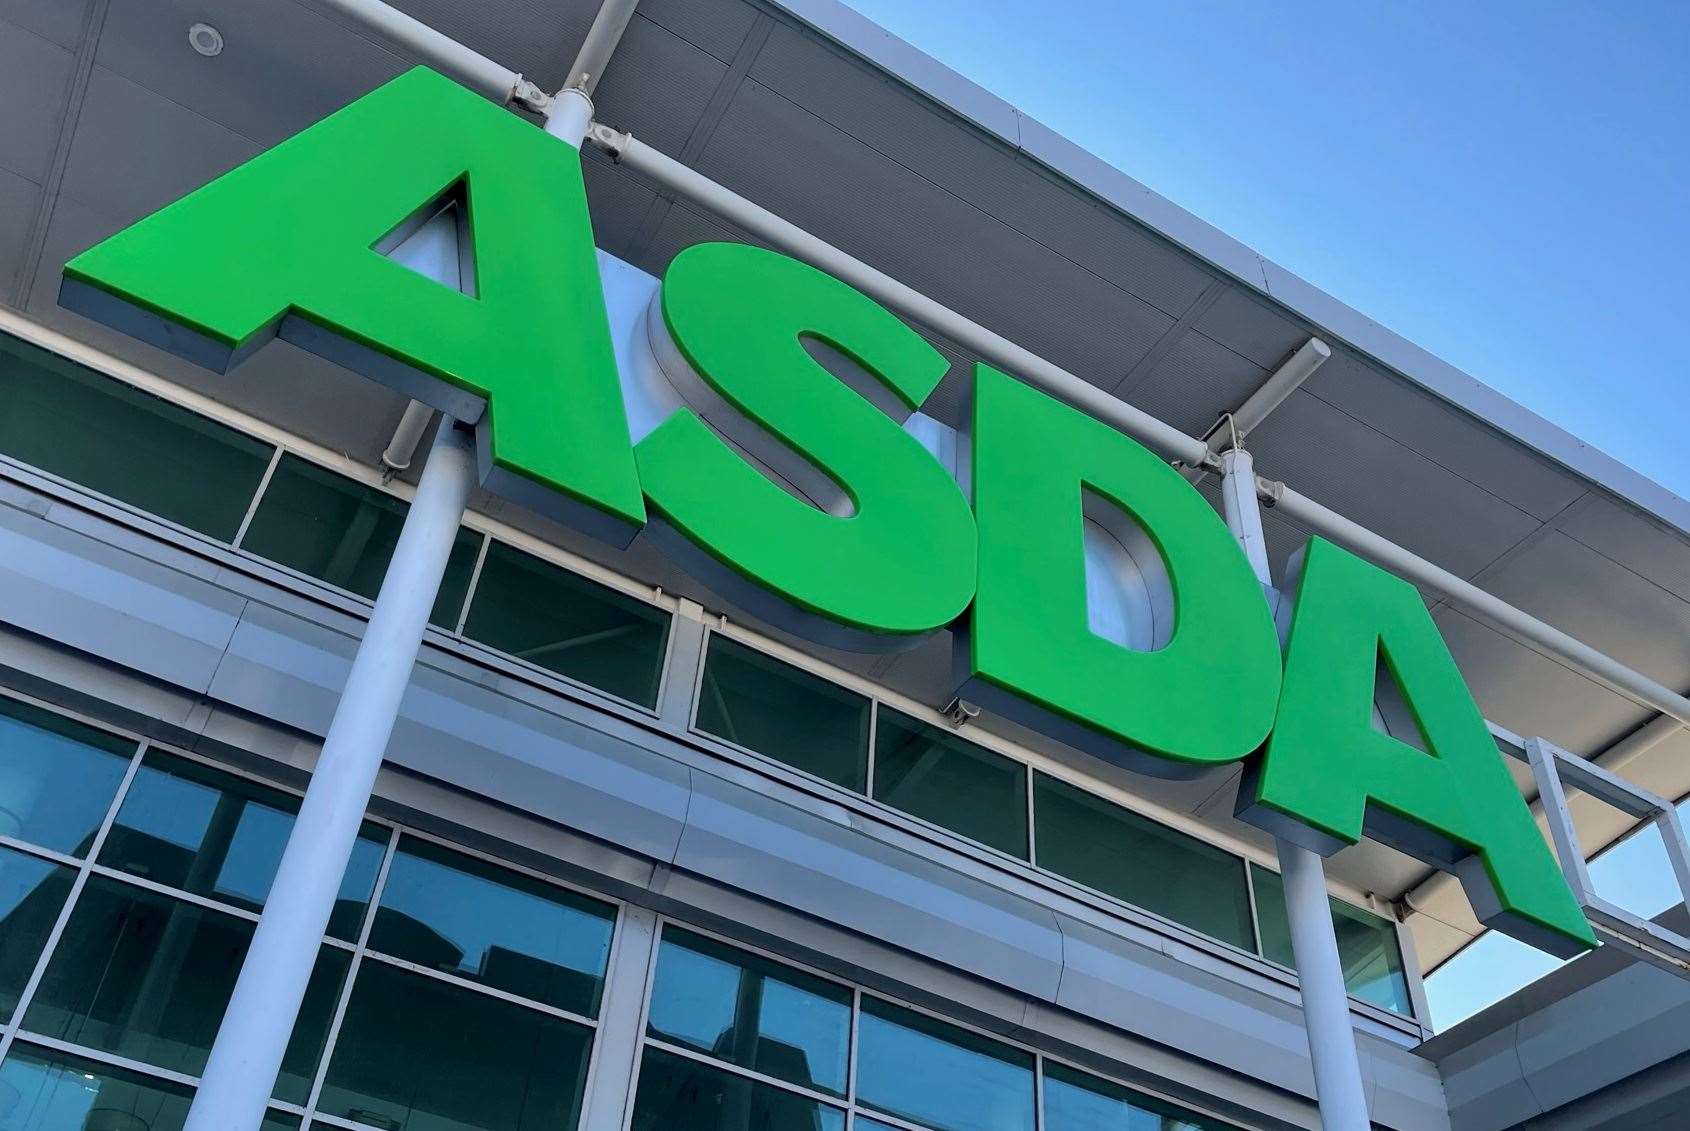 Asda is asking people with the items to return them